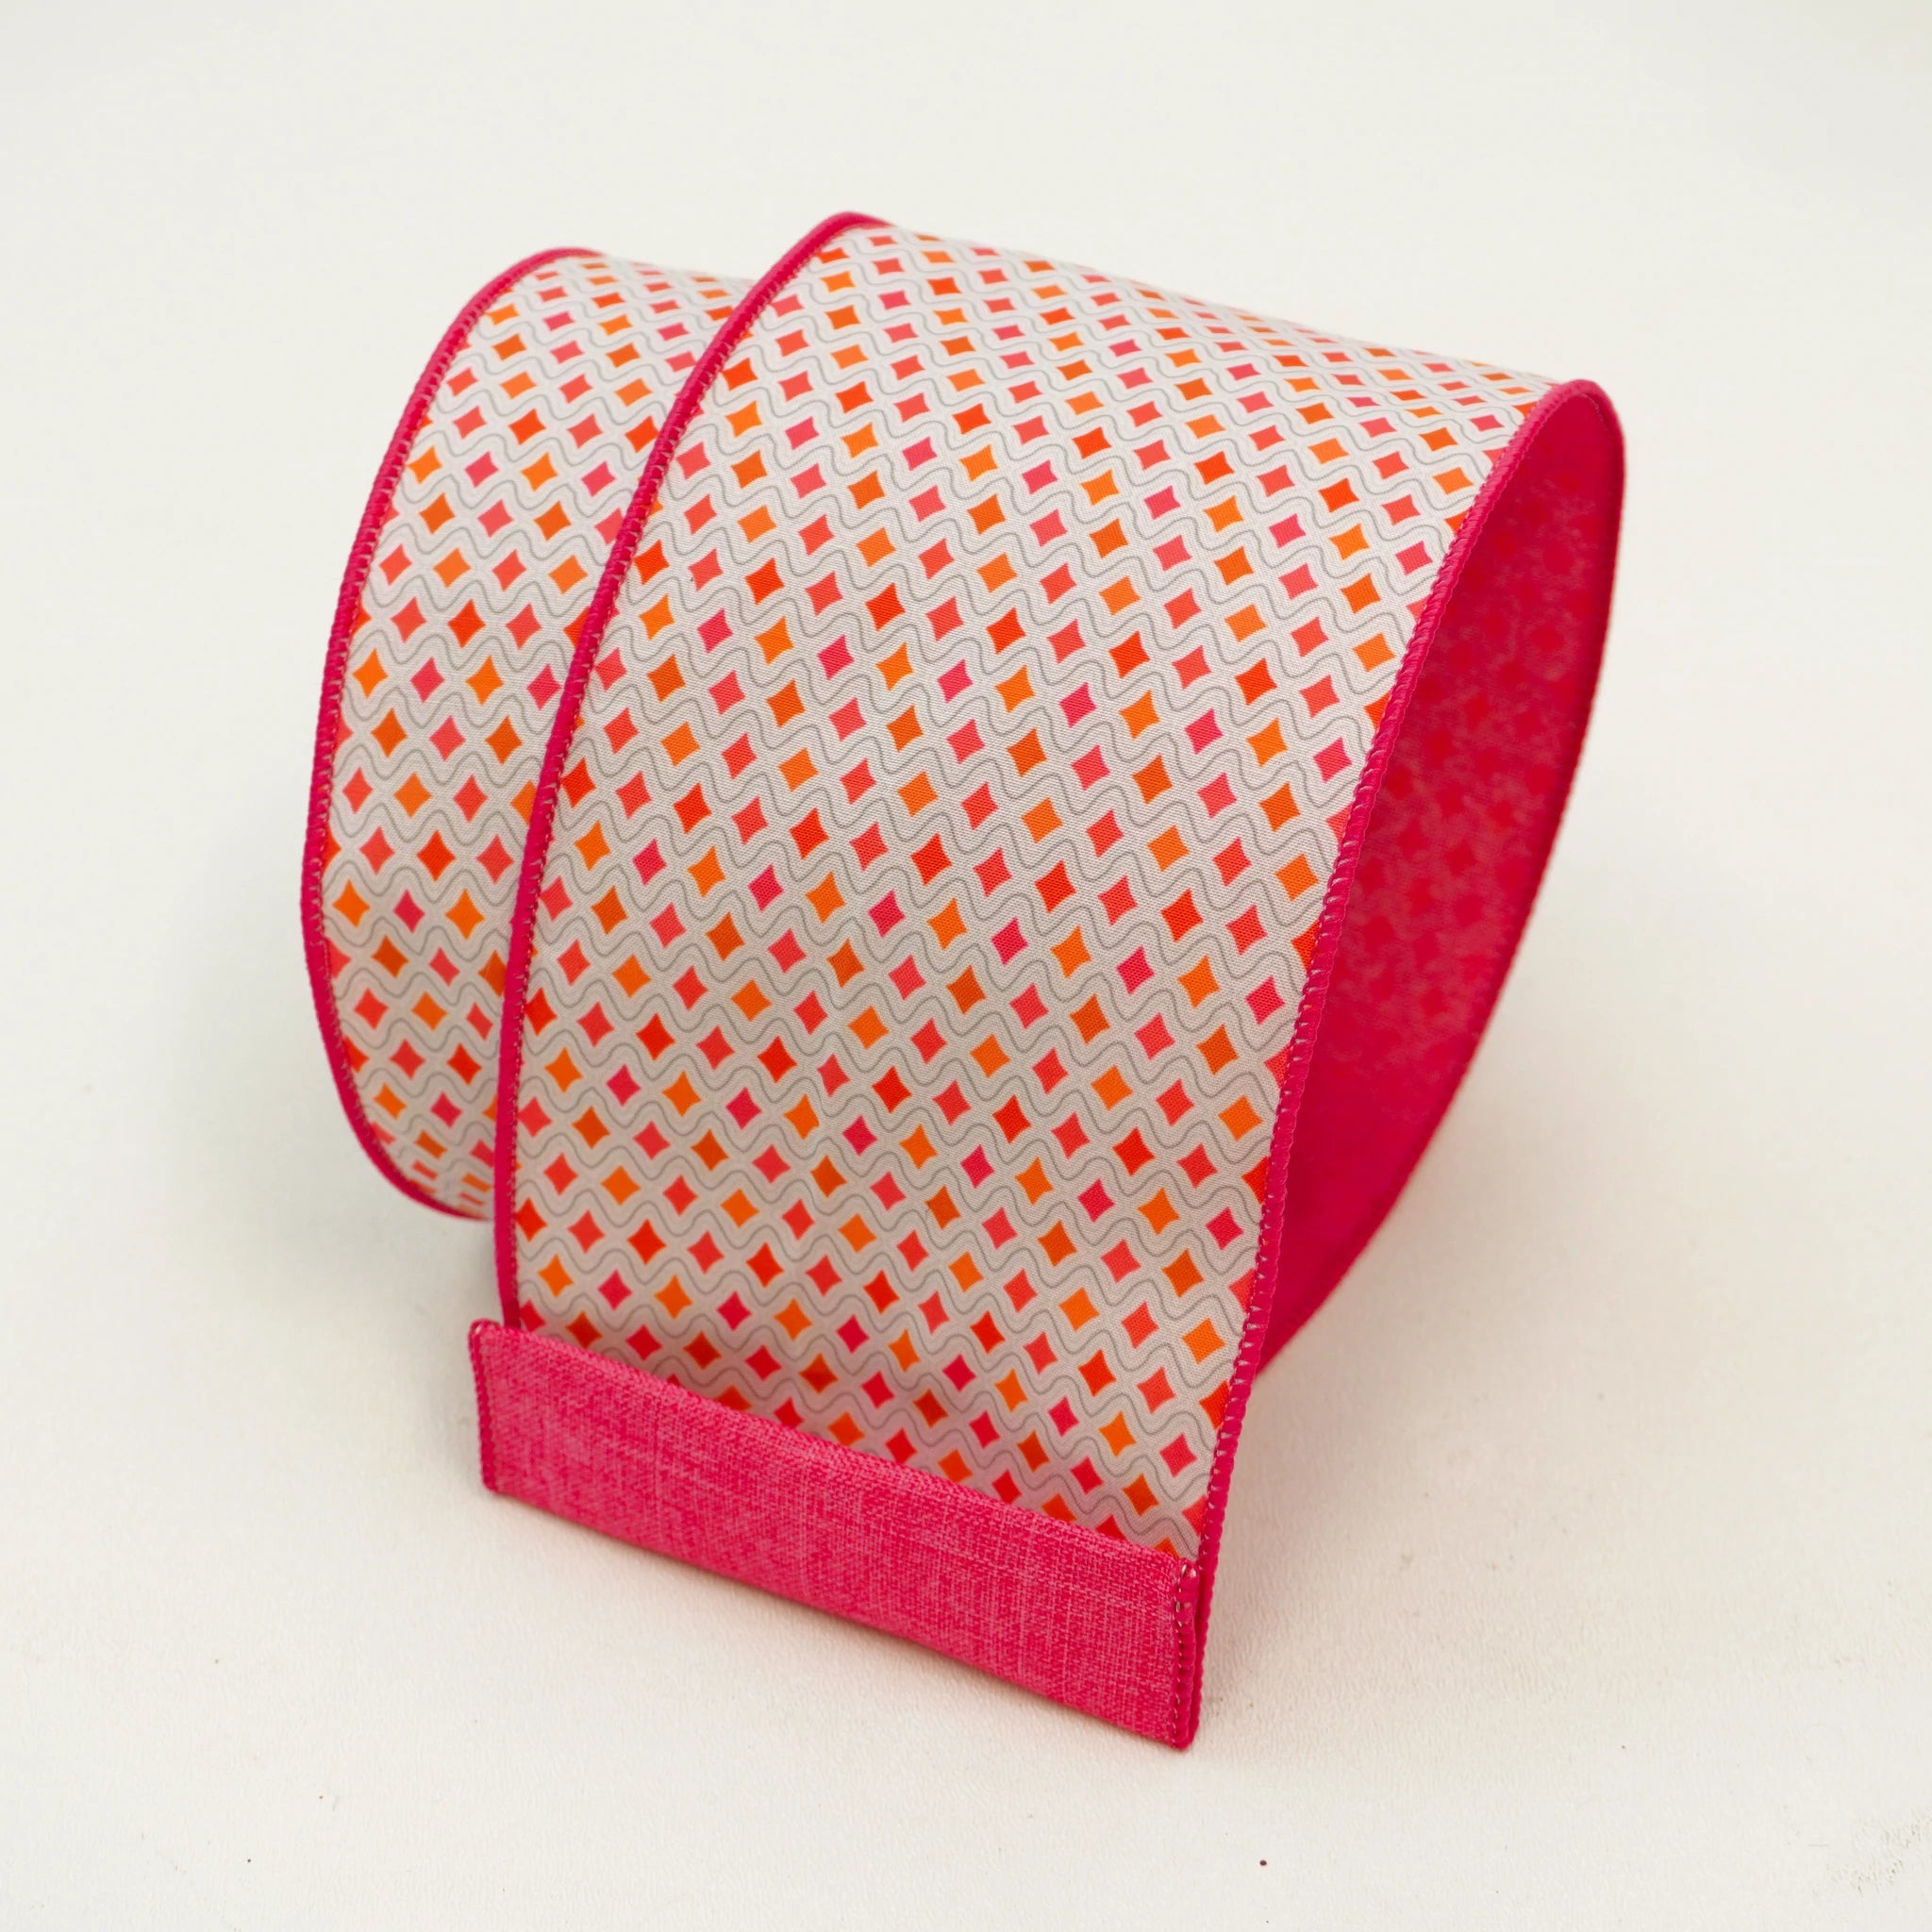 LUXURY 4 X 10 YD Pink Gingham Wired Ribbon